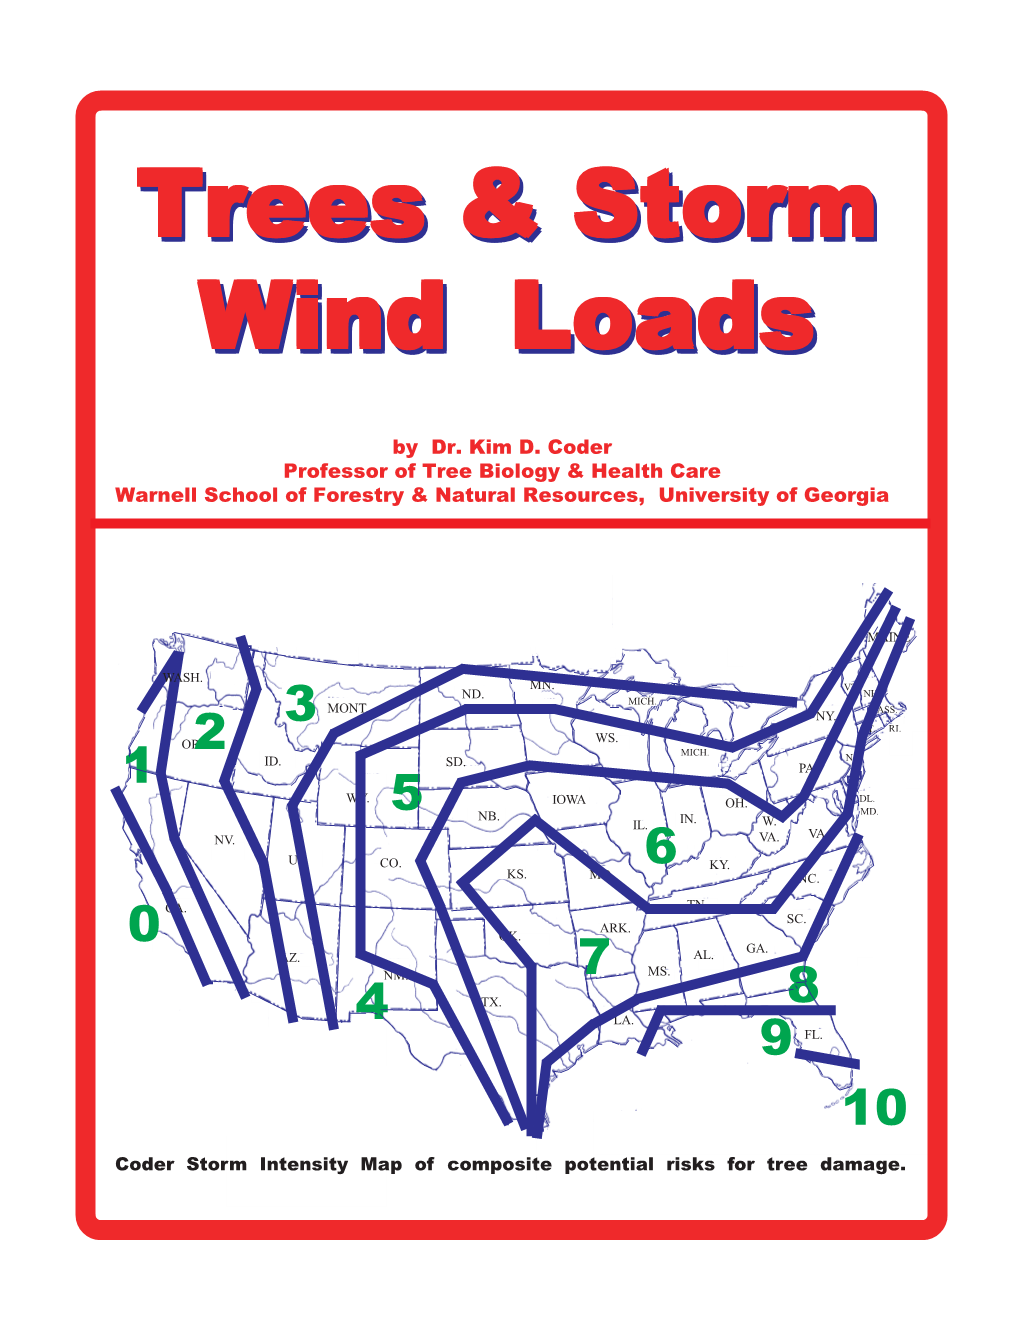 Storm Wind Loads on Trees Thought by the Author to Provide the Best Means for Considering Fundamental Tree Health Care Issues Surrounding Tree Biomechanics